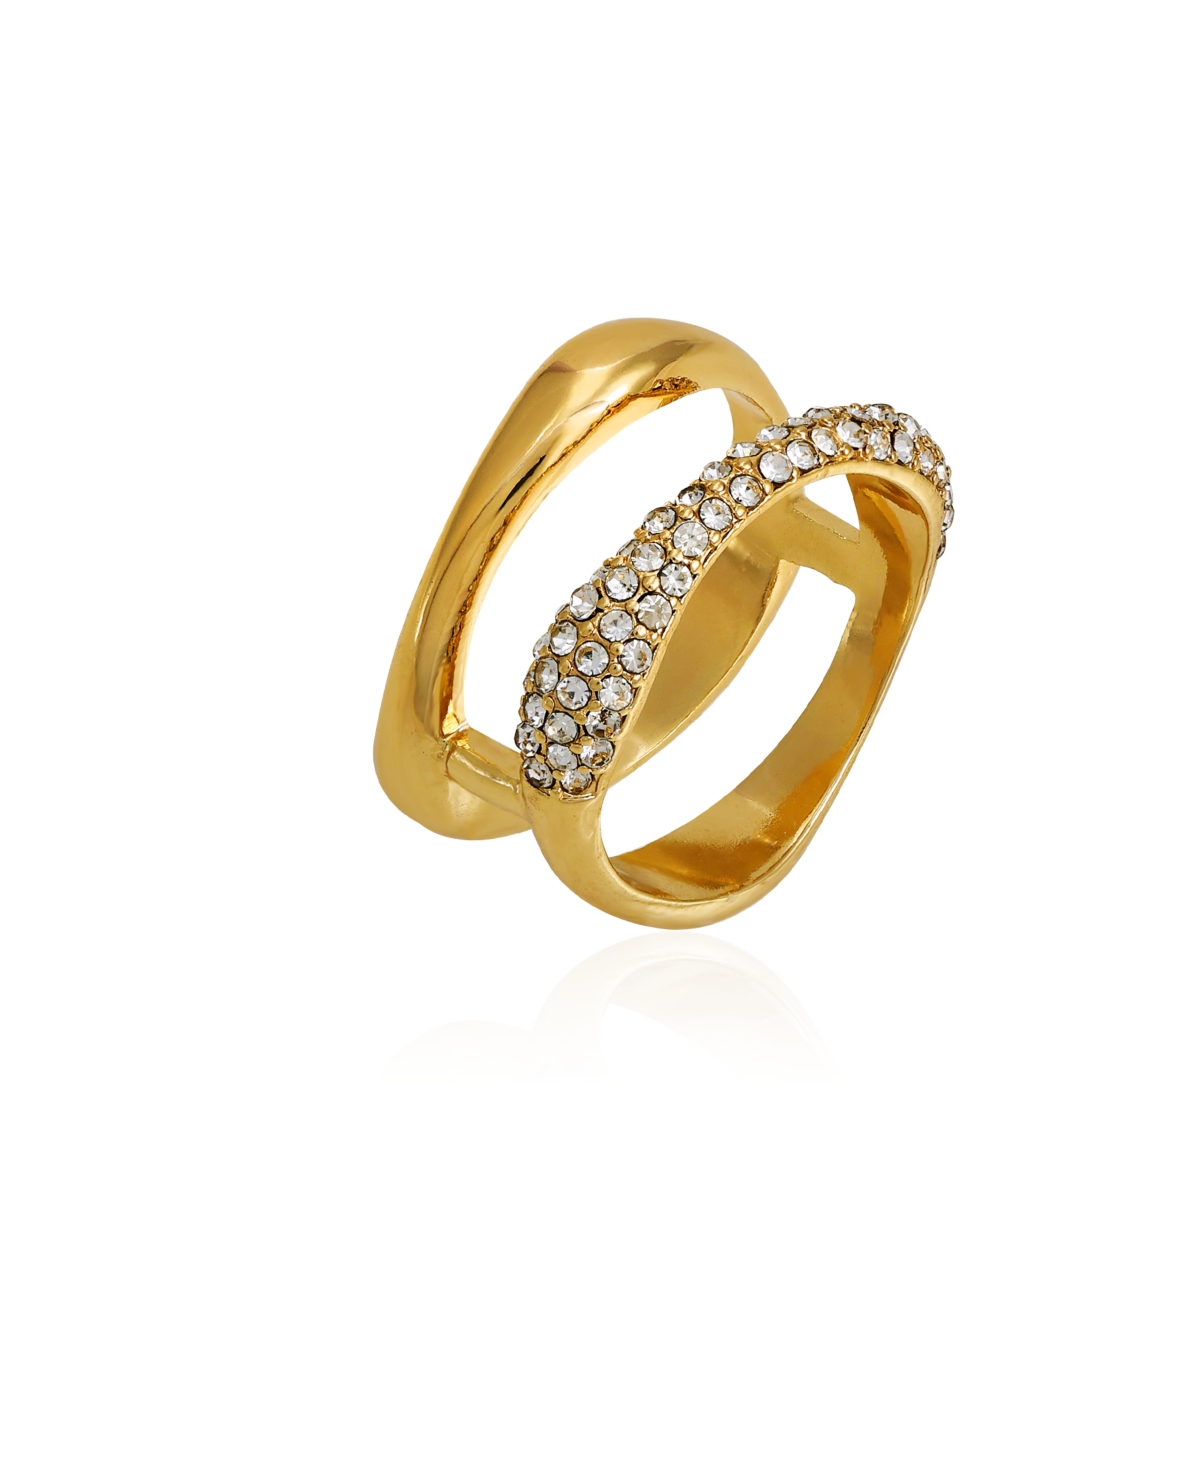 Gold-Tone Glass Stone Ring, Size 7 - Gold